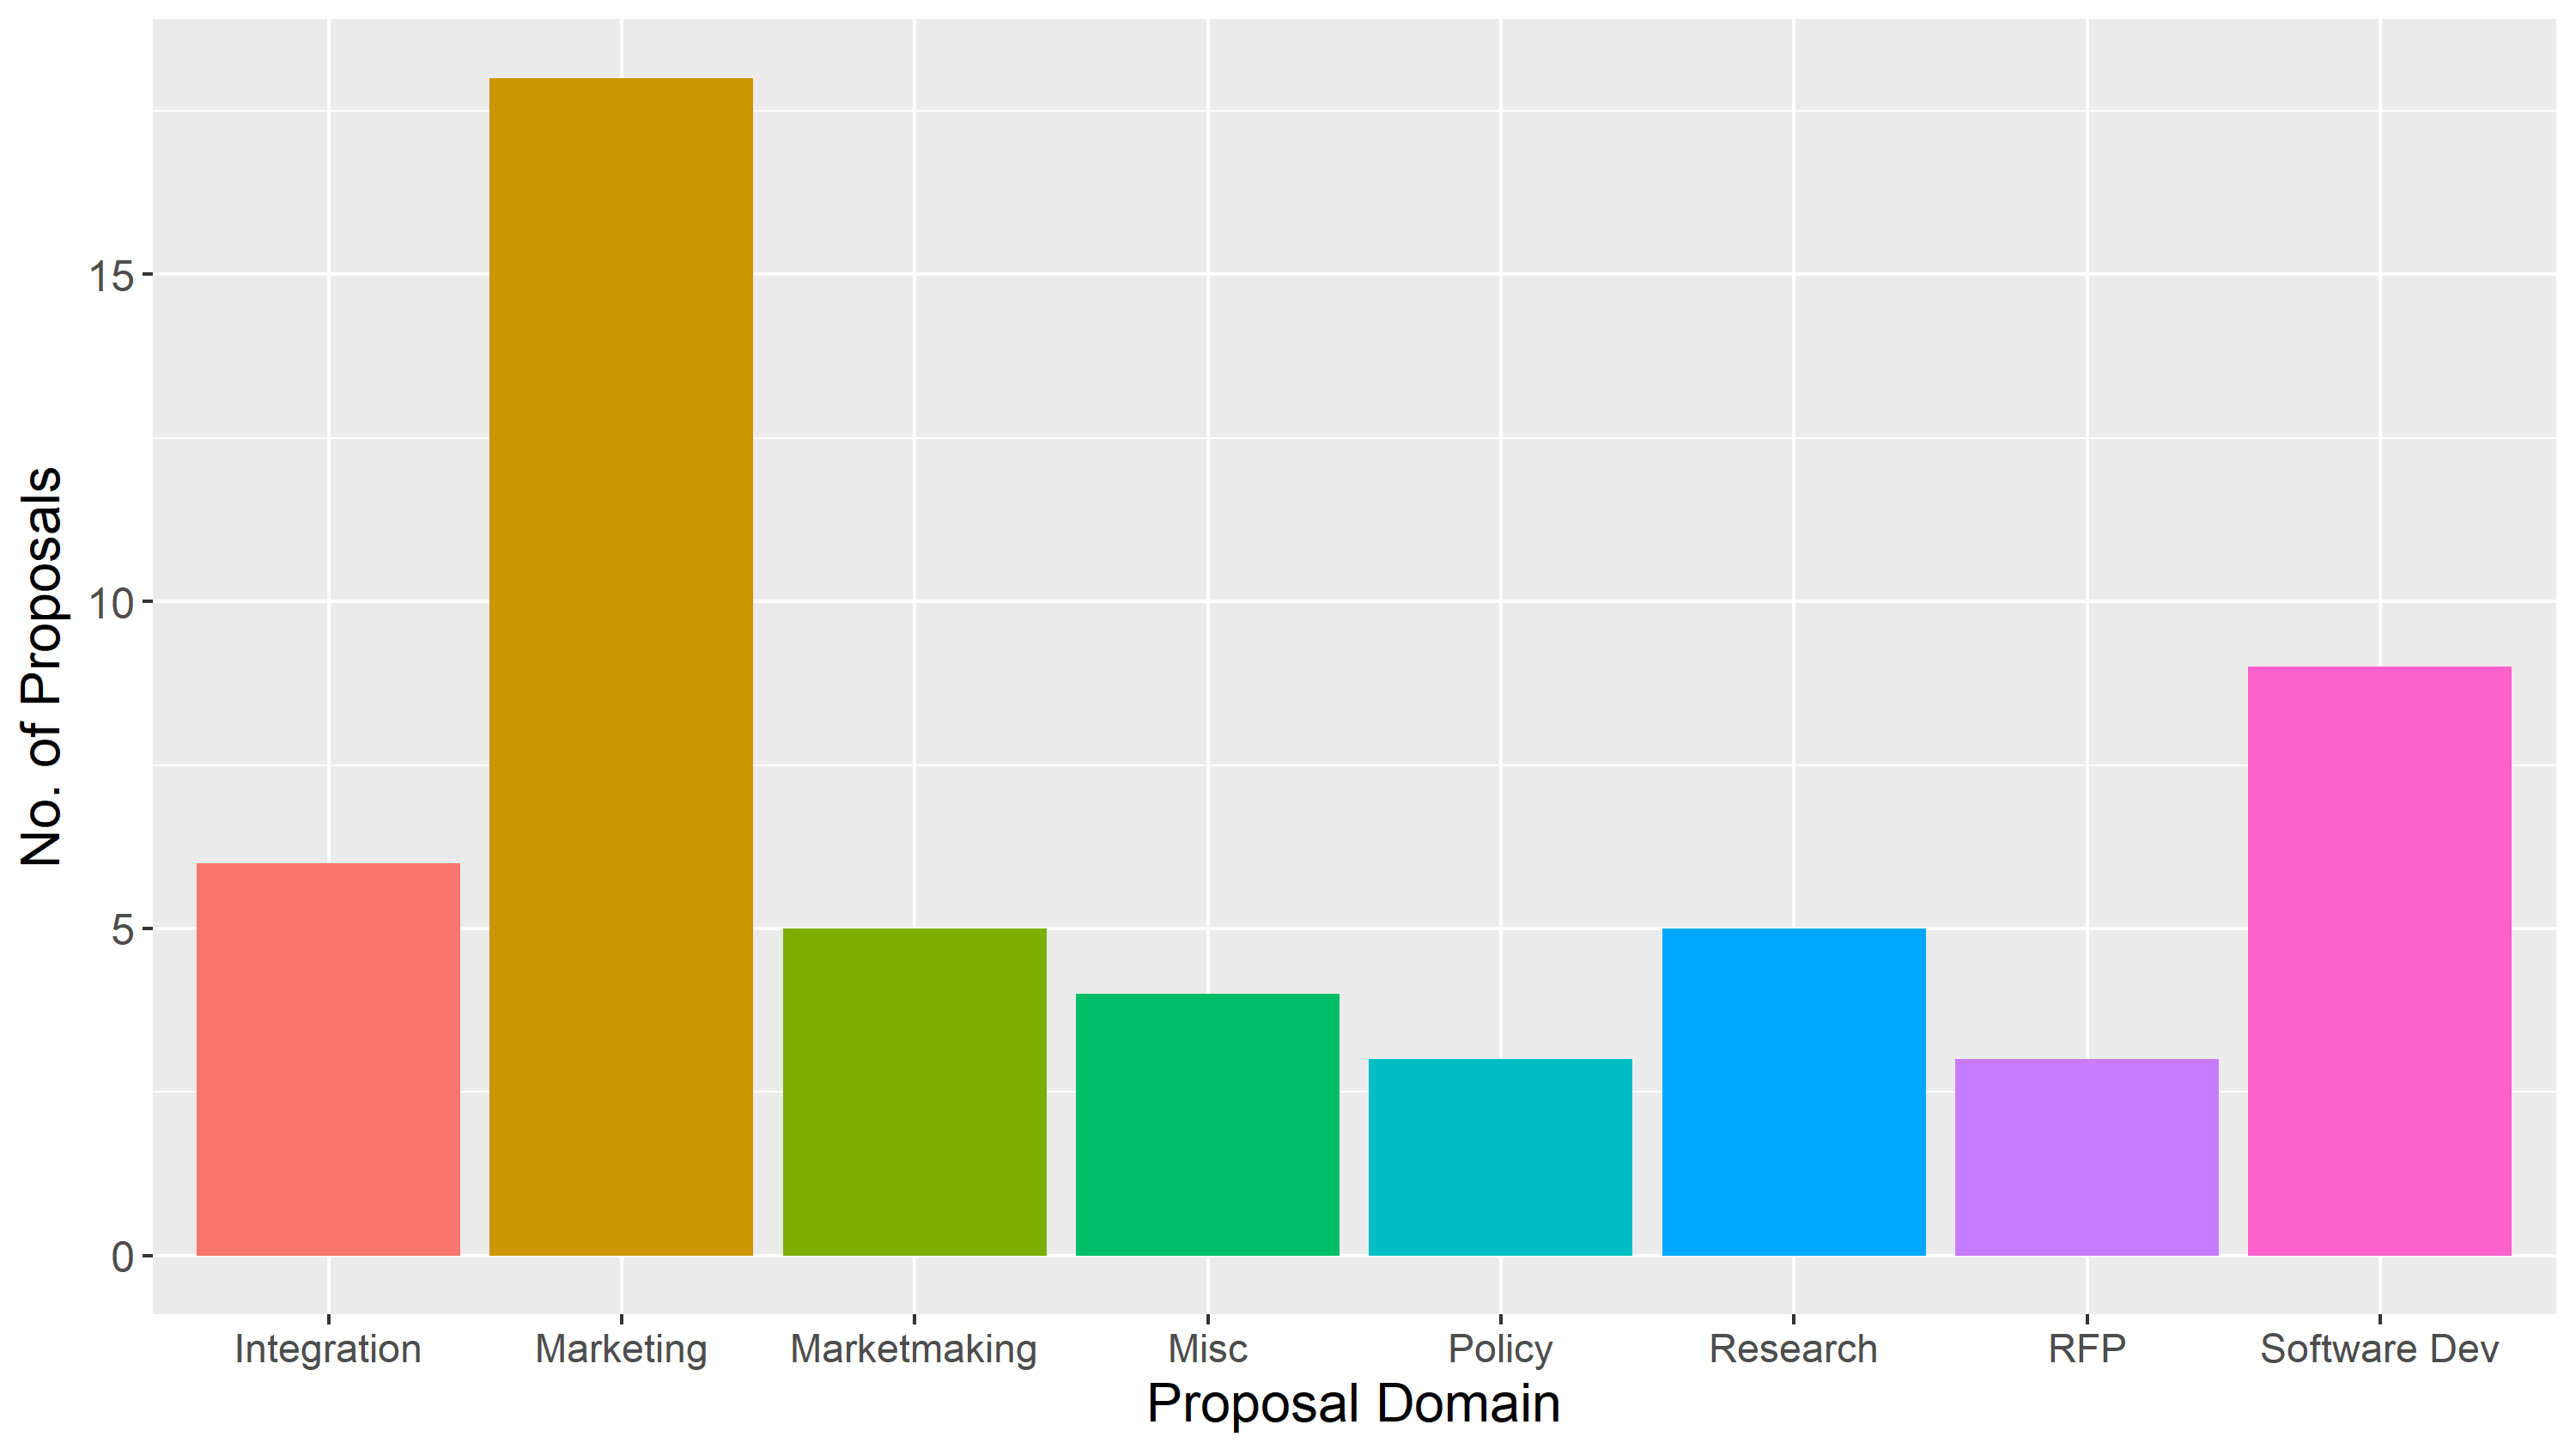 Number of proposals relating to each domain